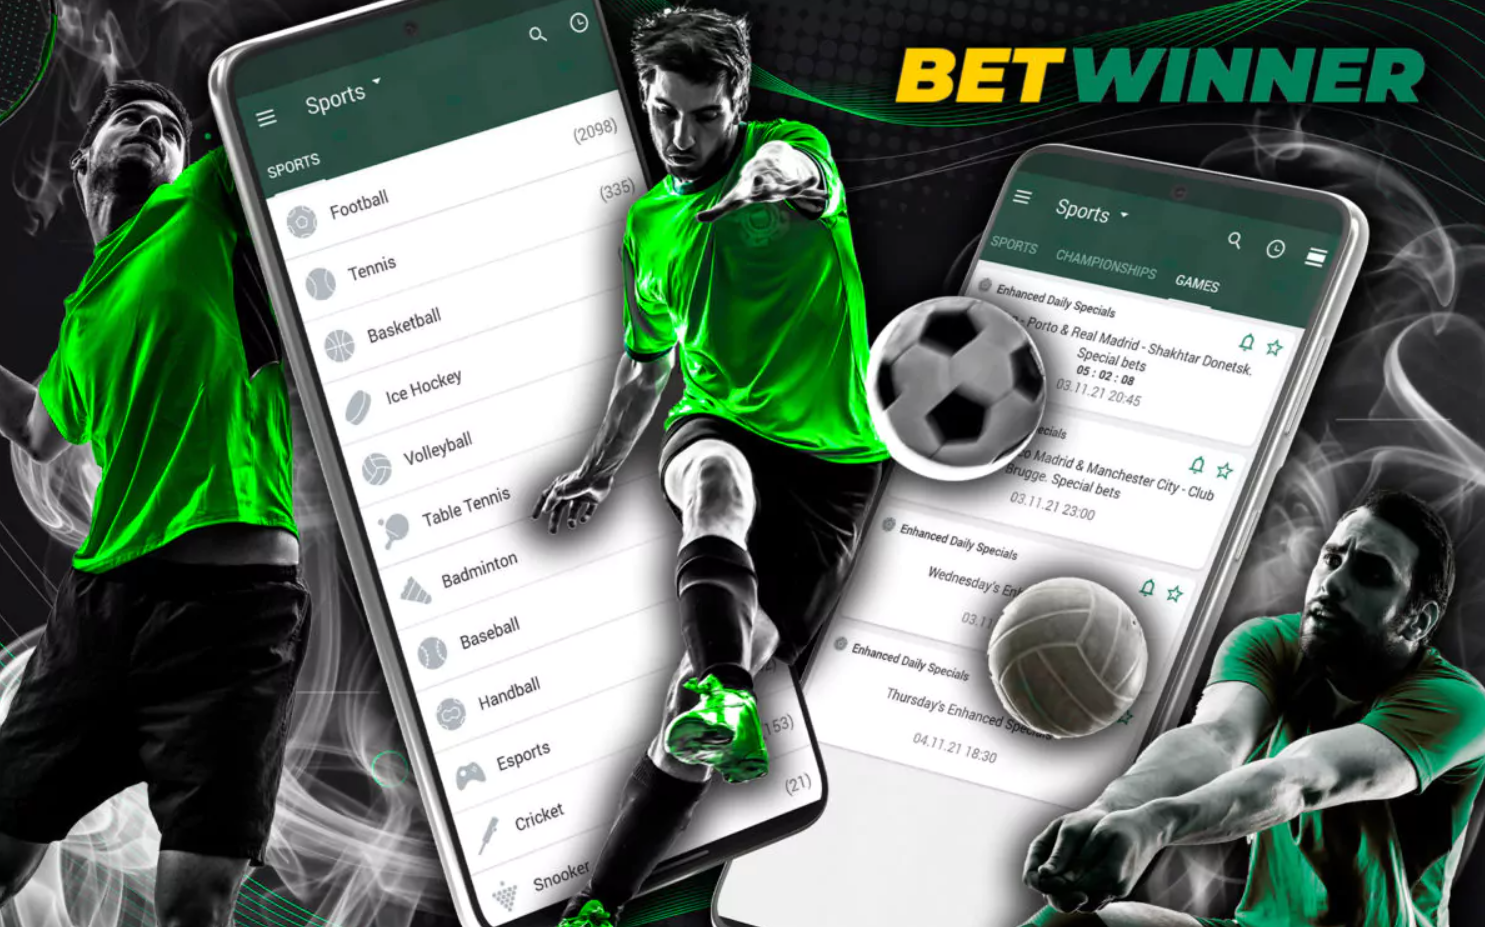 Betwinner review and information